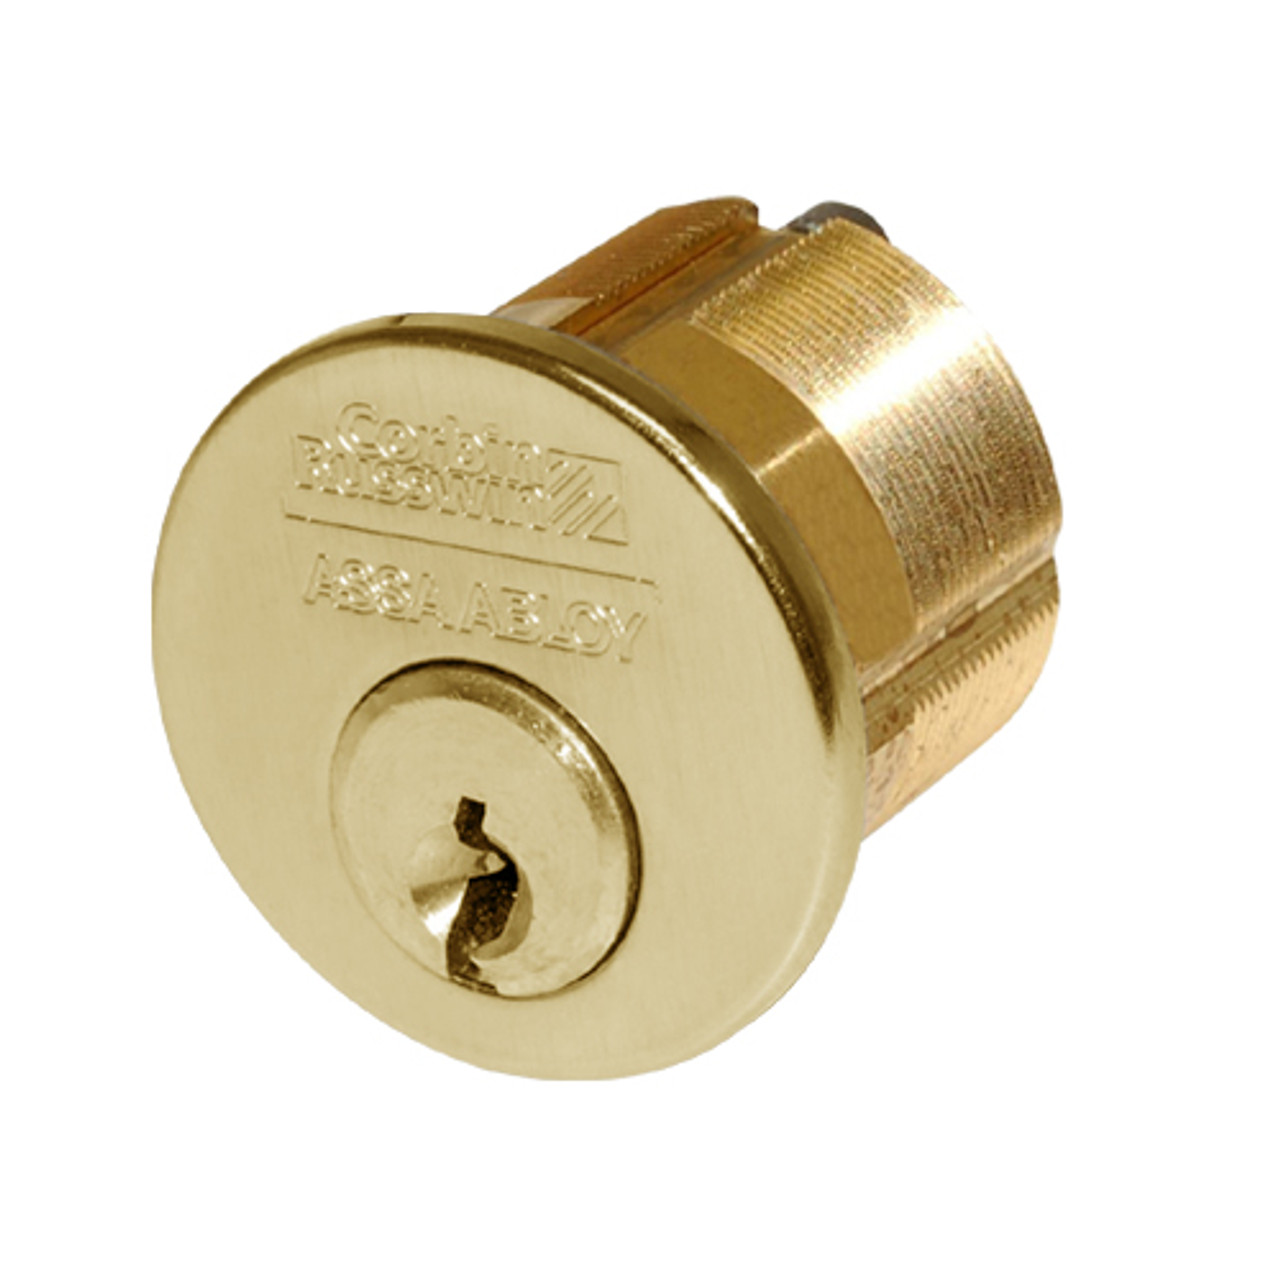 CR1000-114-A06-6-60-605 Corbin Conventional Mortise Cylinder for Mortise Lock and DL3000 Deadlocks with Schlage L9000 Cam in Bright Brass Finish